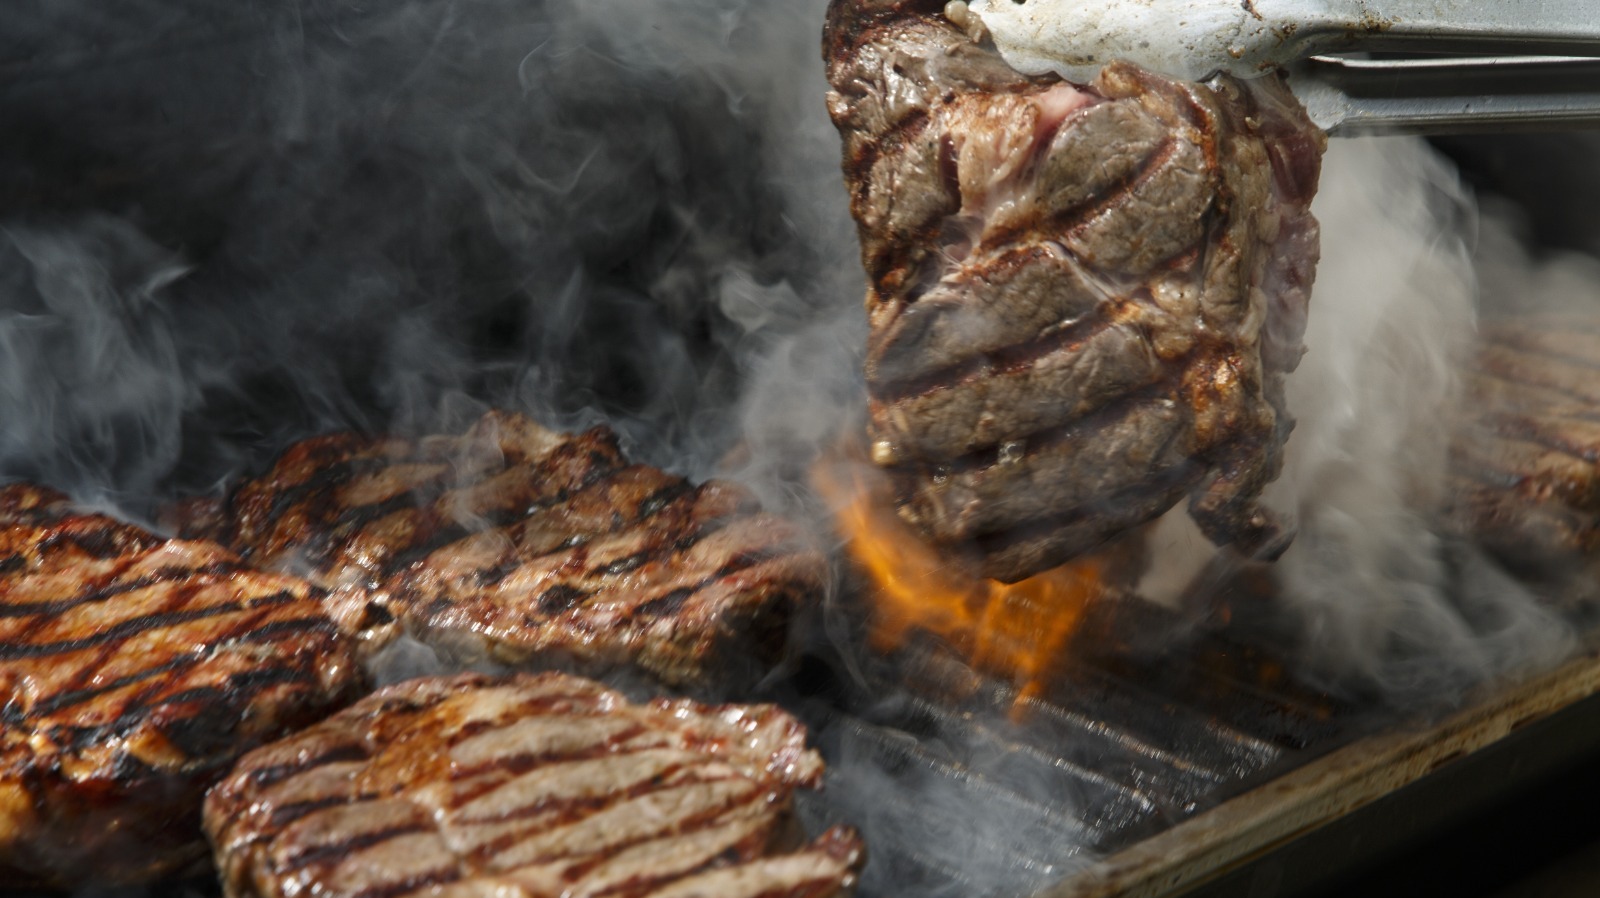 https://www.thedailymeal.com/img/gallery/the-13-best-steaks-for-grilling/l-intro-1674565146.jpg